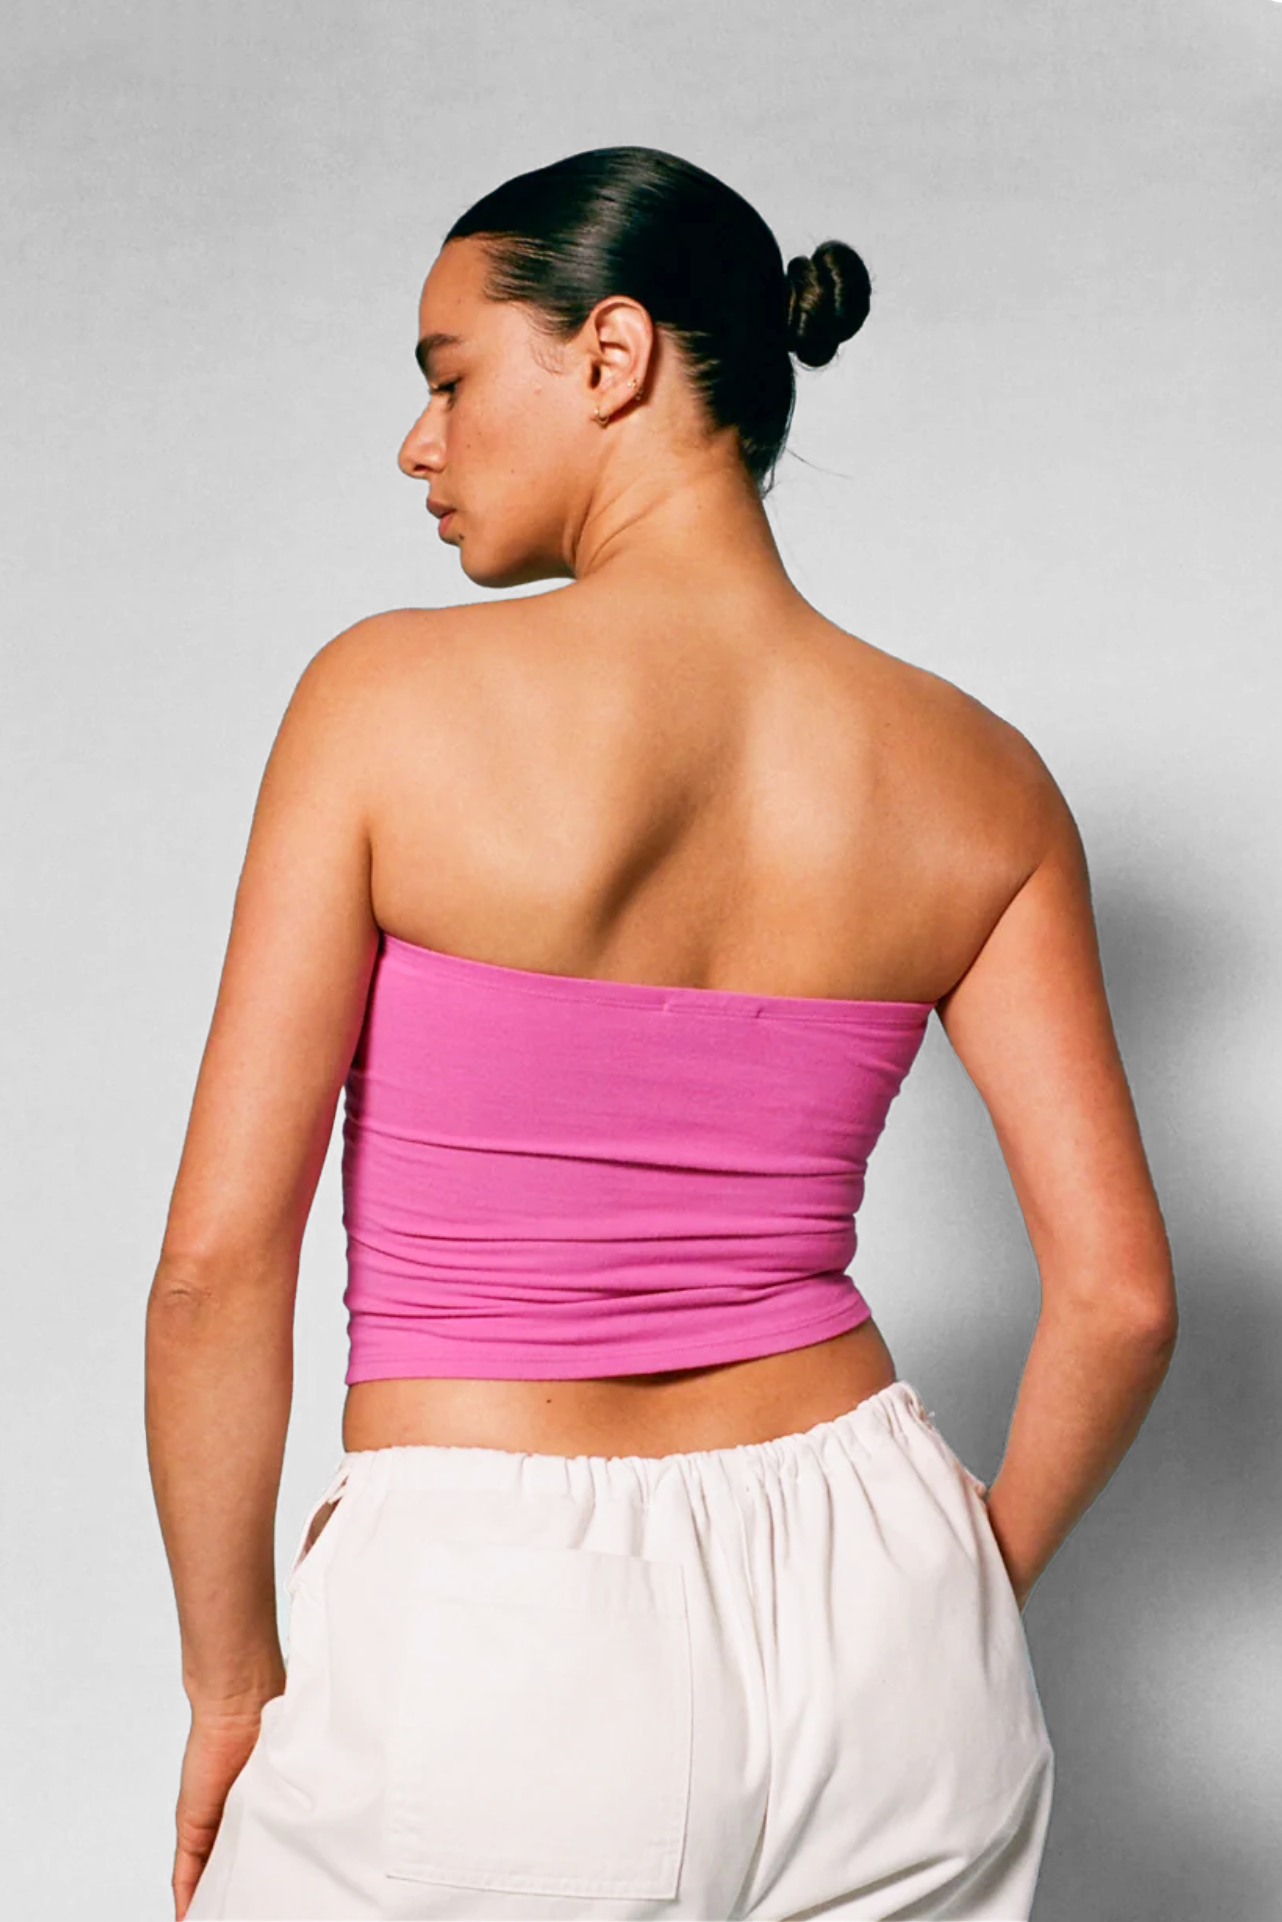 The Tube Convertible Top in Pitaya by Gil Rodriguez http://www.shoprecital.com